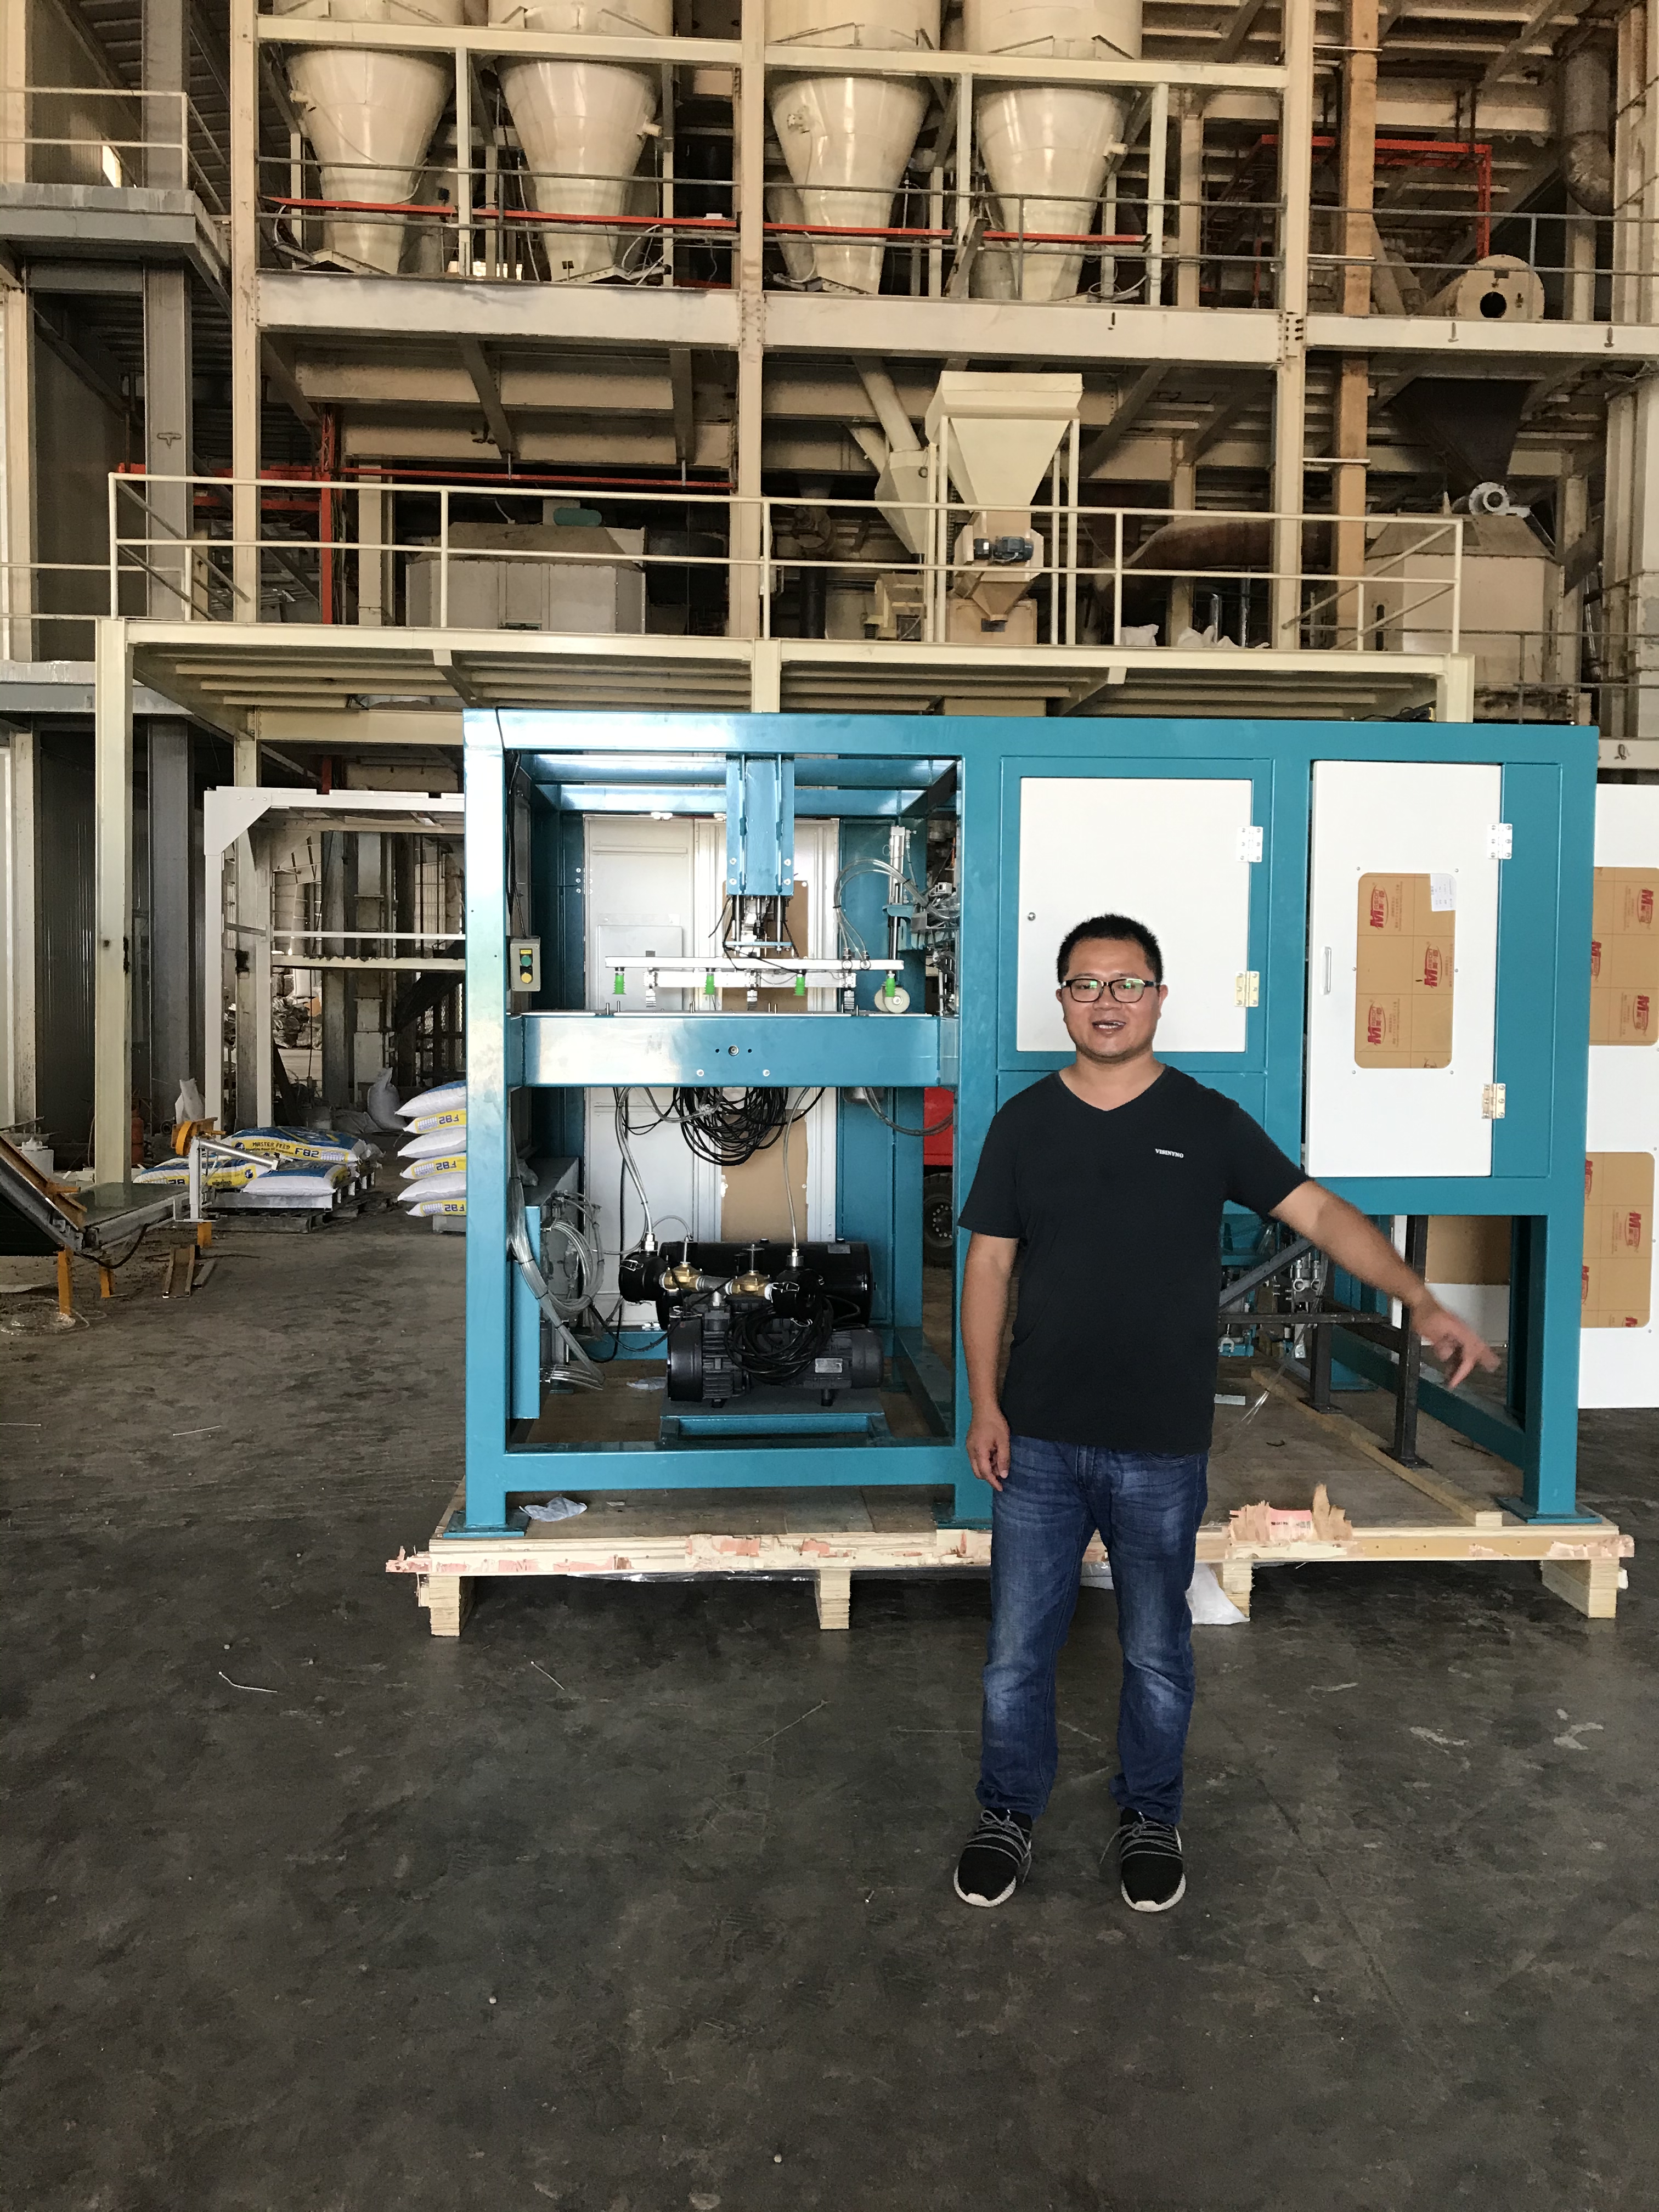 Maize and Wheat Blends bagging machine Automated Bagging Line Fully Automatic Packing Palletizing Line, Fully Automatic Packing Line, Fully Automatic Bagging Line, Fully Automatic filling and packagin